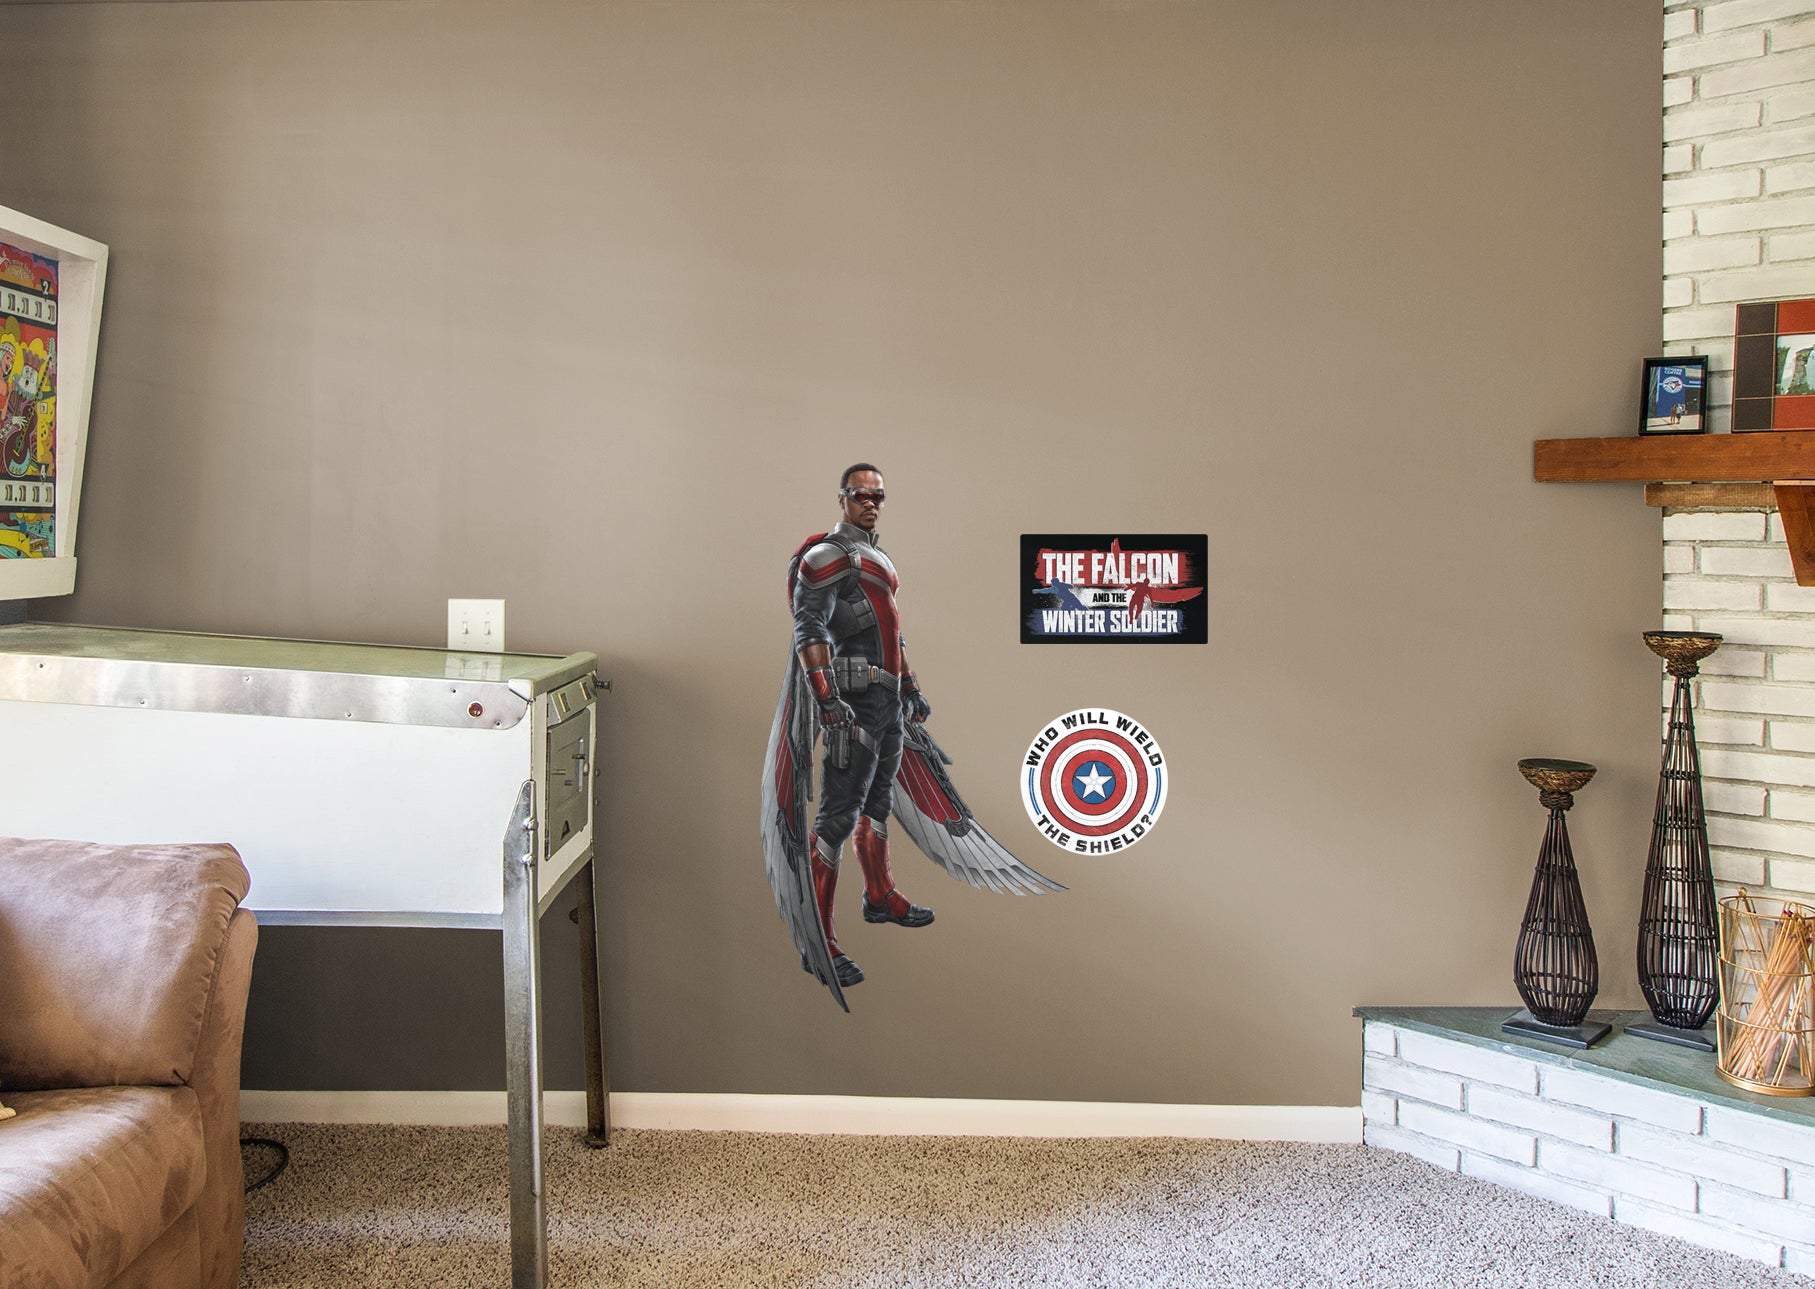 The Falcon & The Winter Soldier FALCON - Officially Licensed Marvel Removable Wall Decal Giant Character + 2 Decals by Fathead |